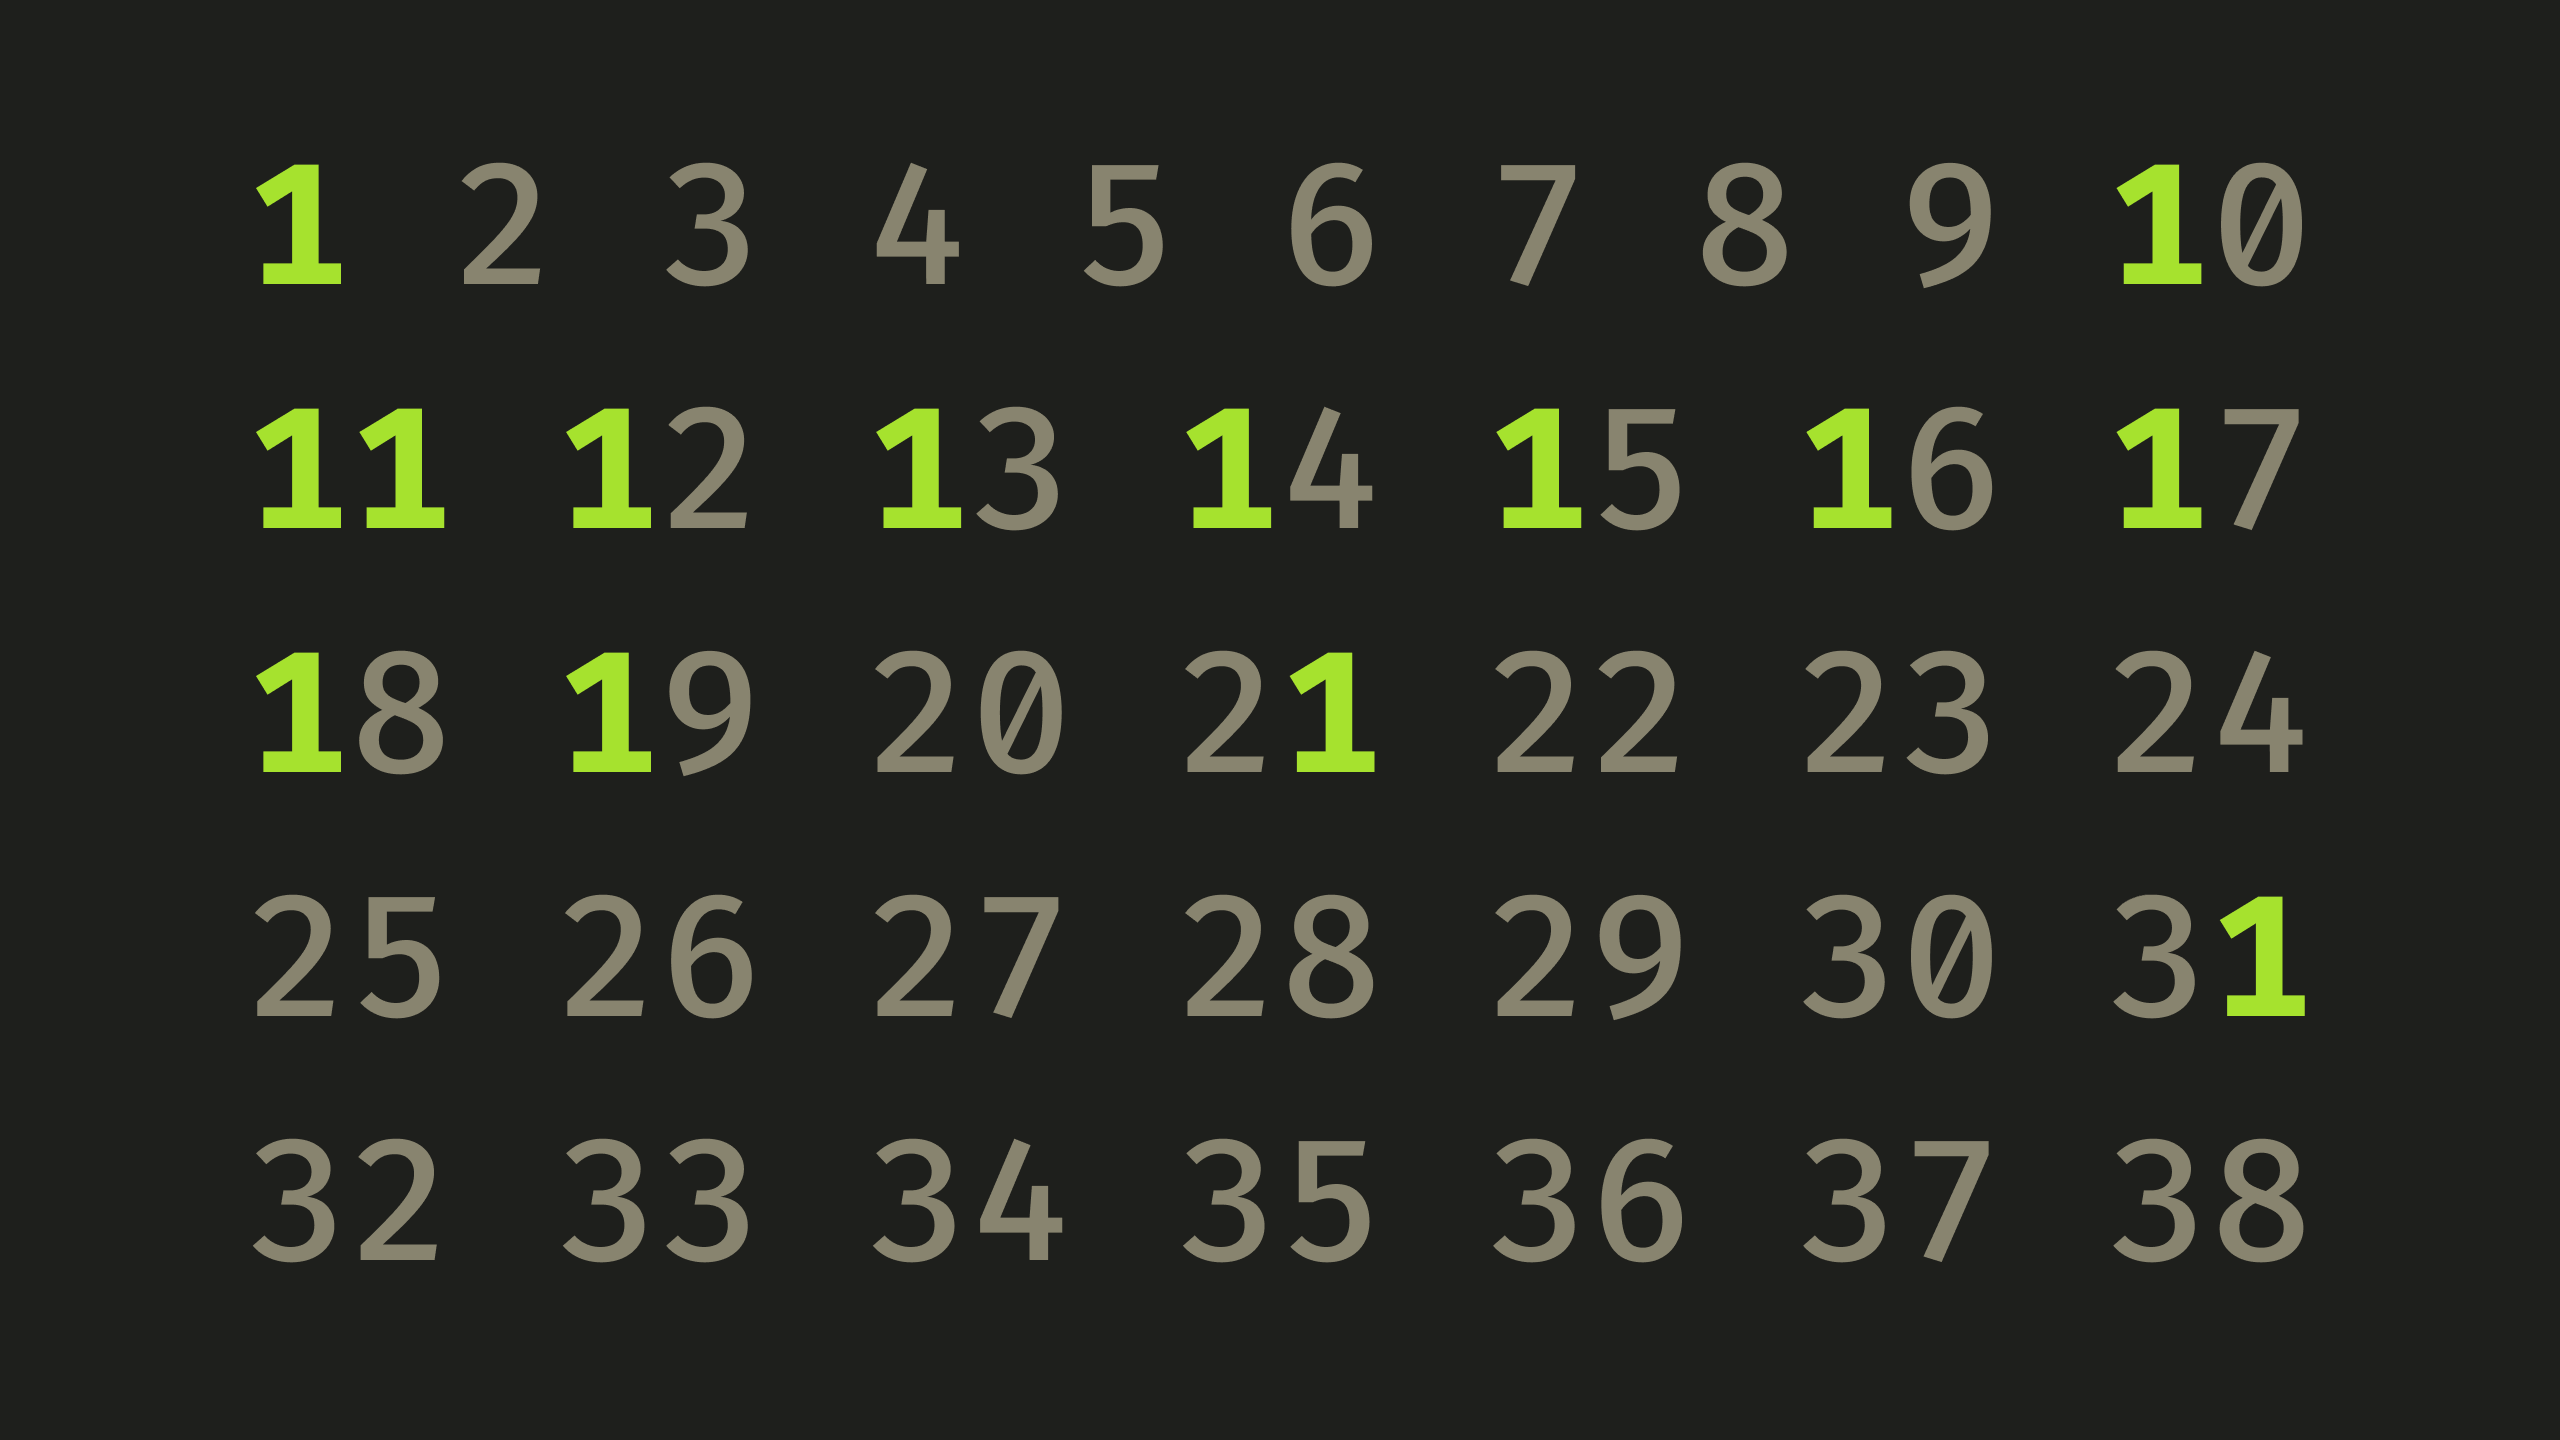 Numbers 1 through 38 with all digits "1" highlighted.